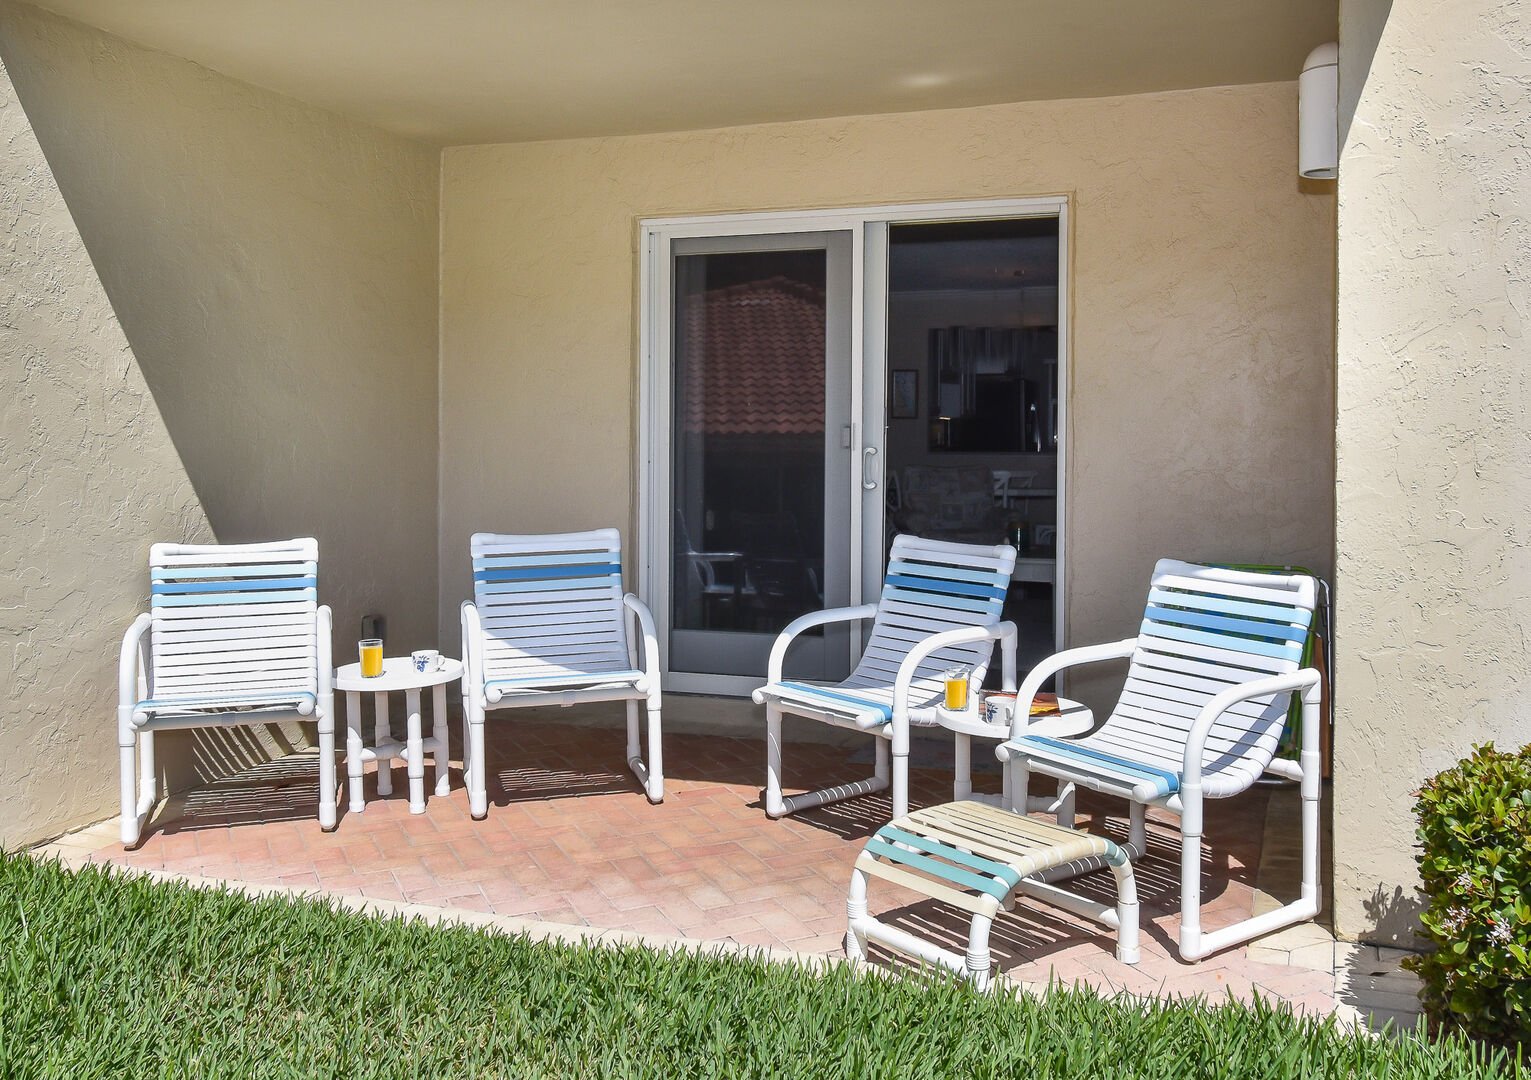 Seating for four on the patio of our New Smyrna Beach oceanfront rental